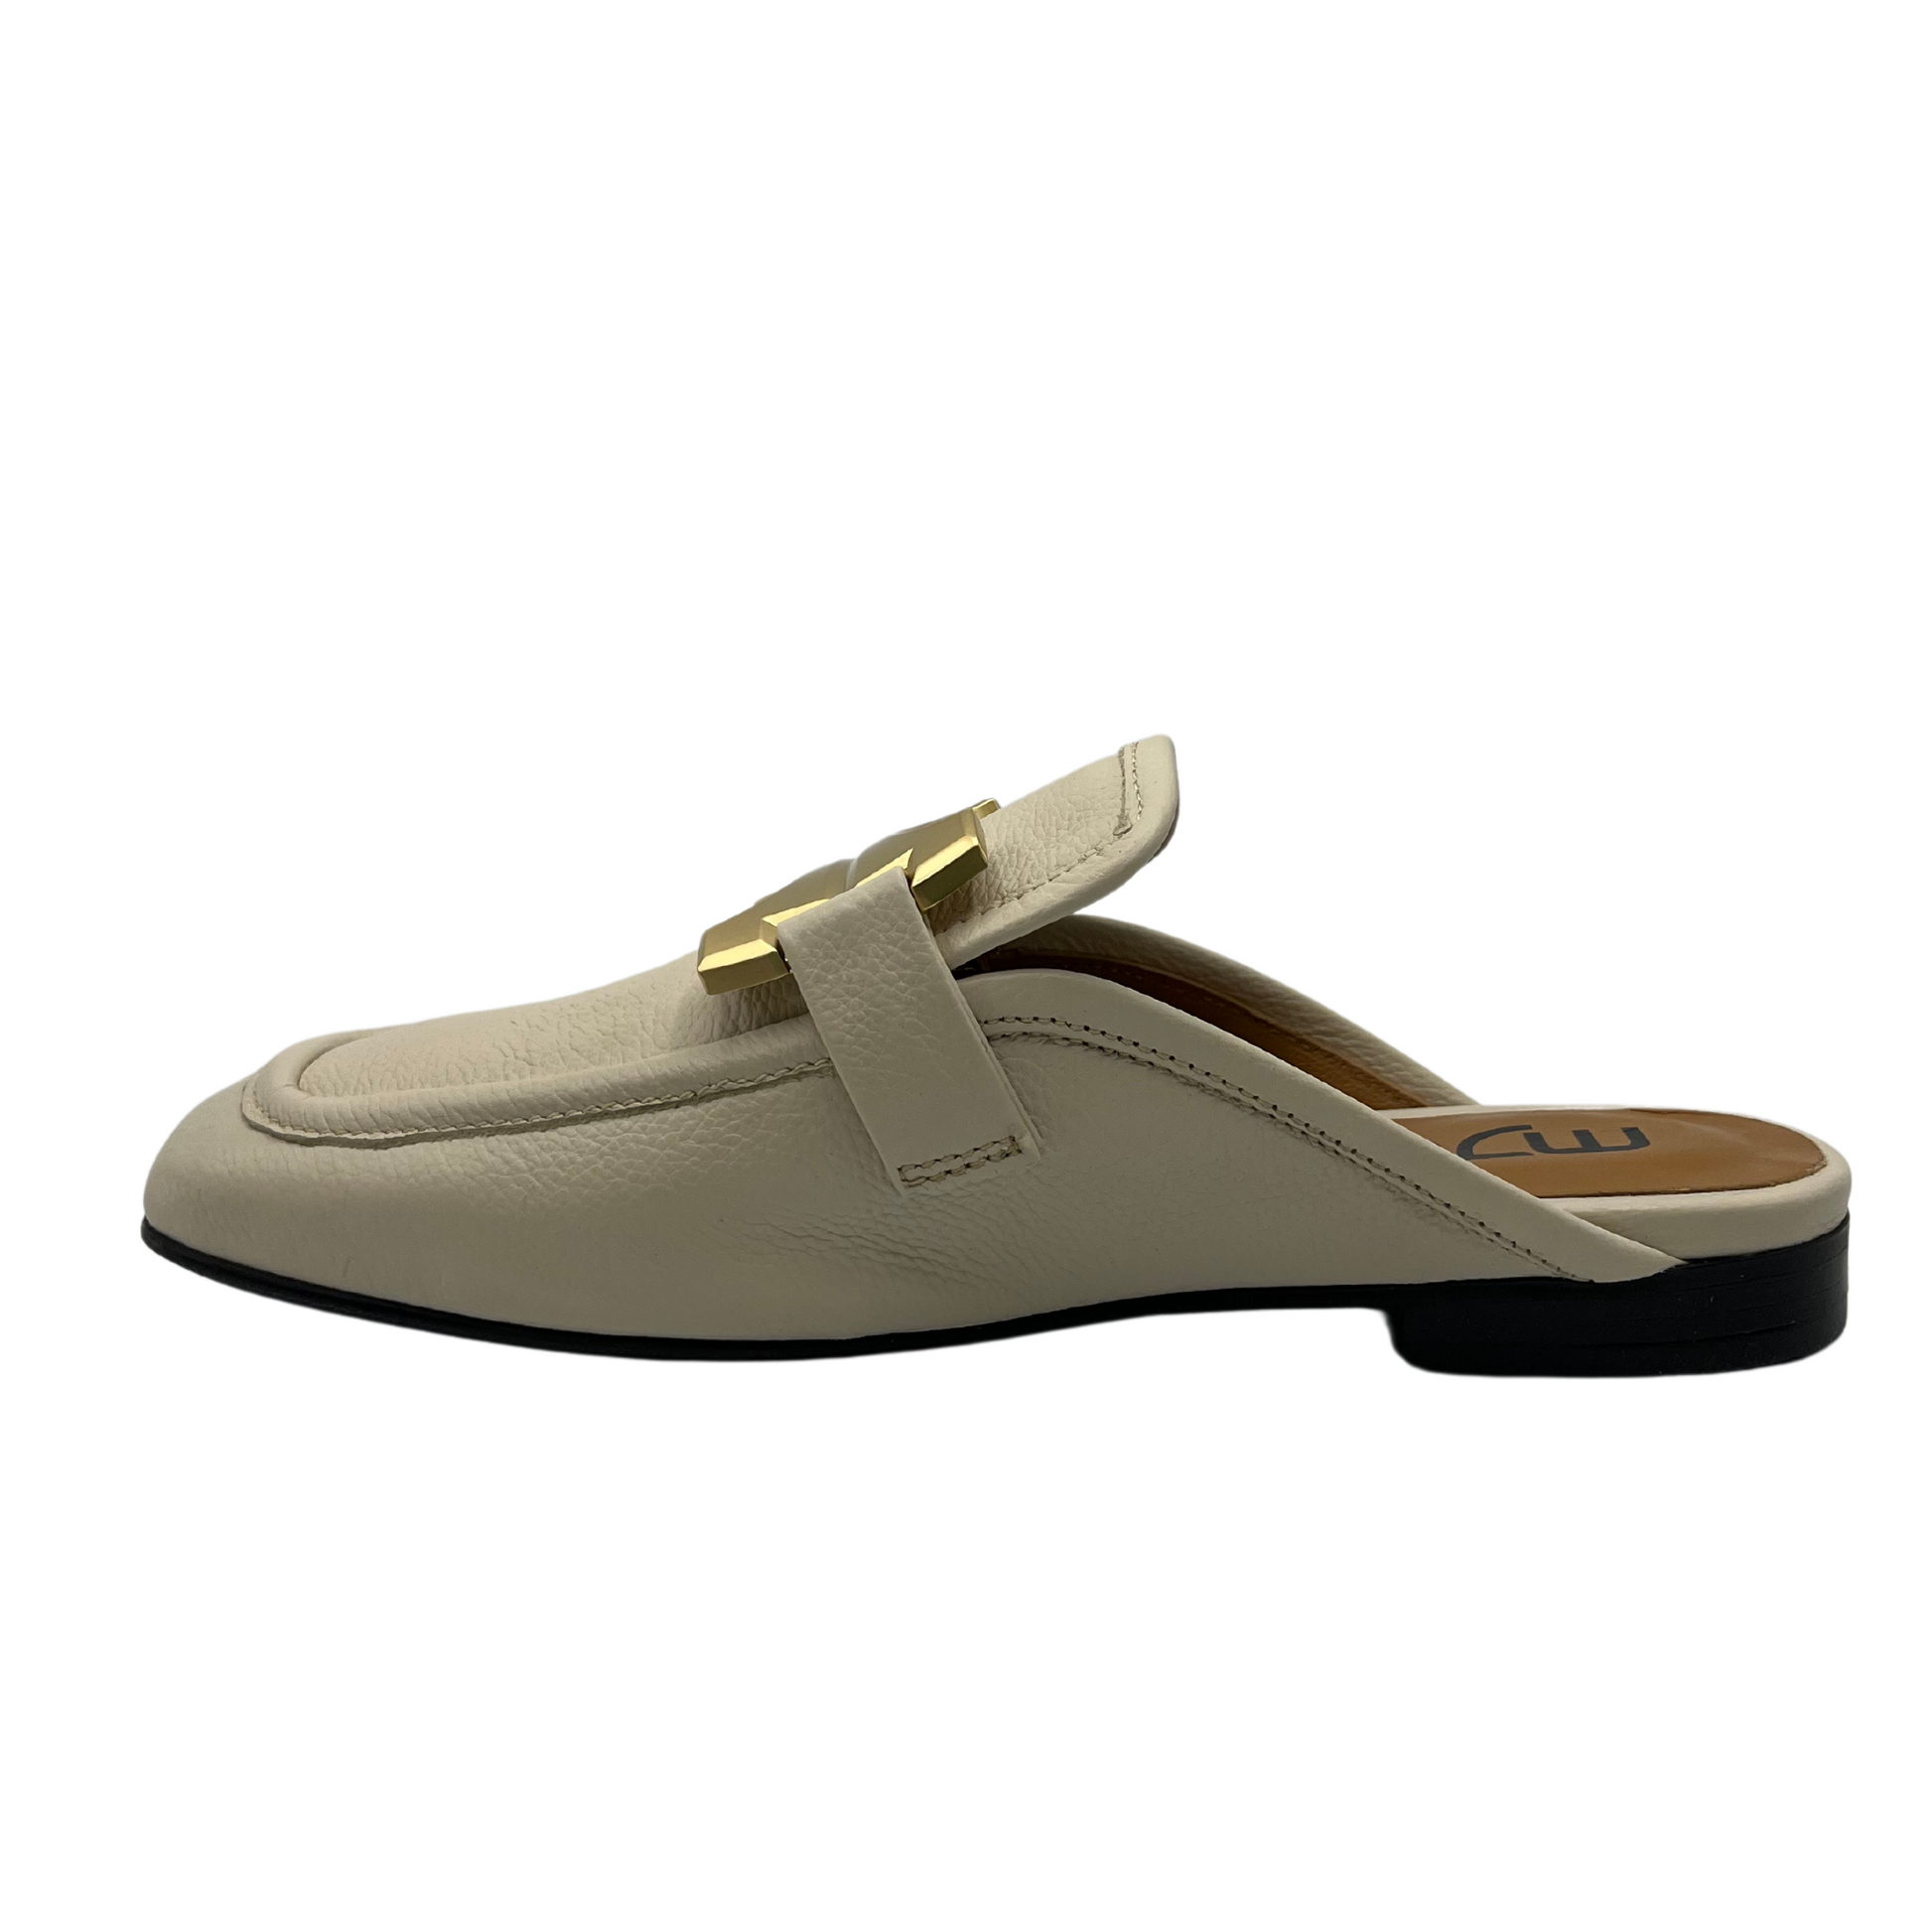 Left facing view of latte leather slip on loafer with short block heel